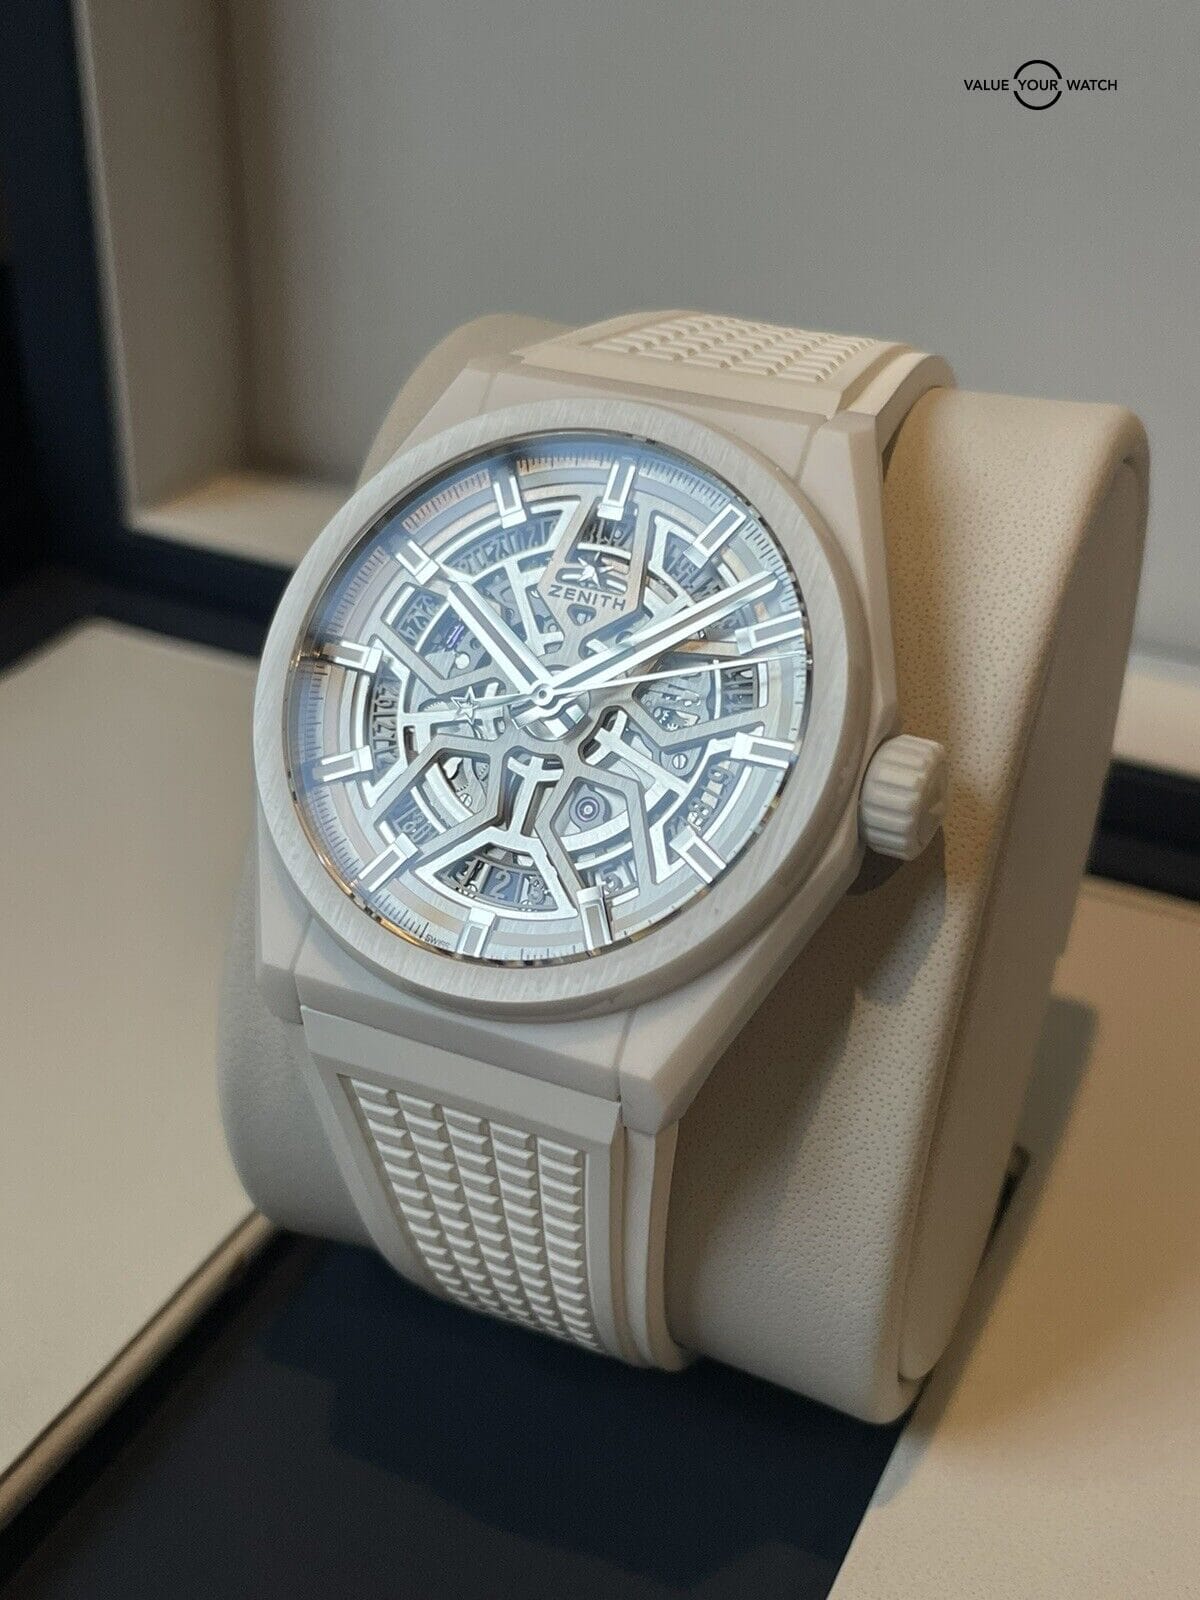 HANDS-ON: White heat – the Zenith Defy Classic in white ceramic